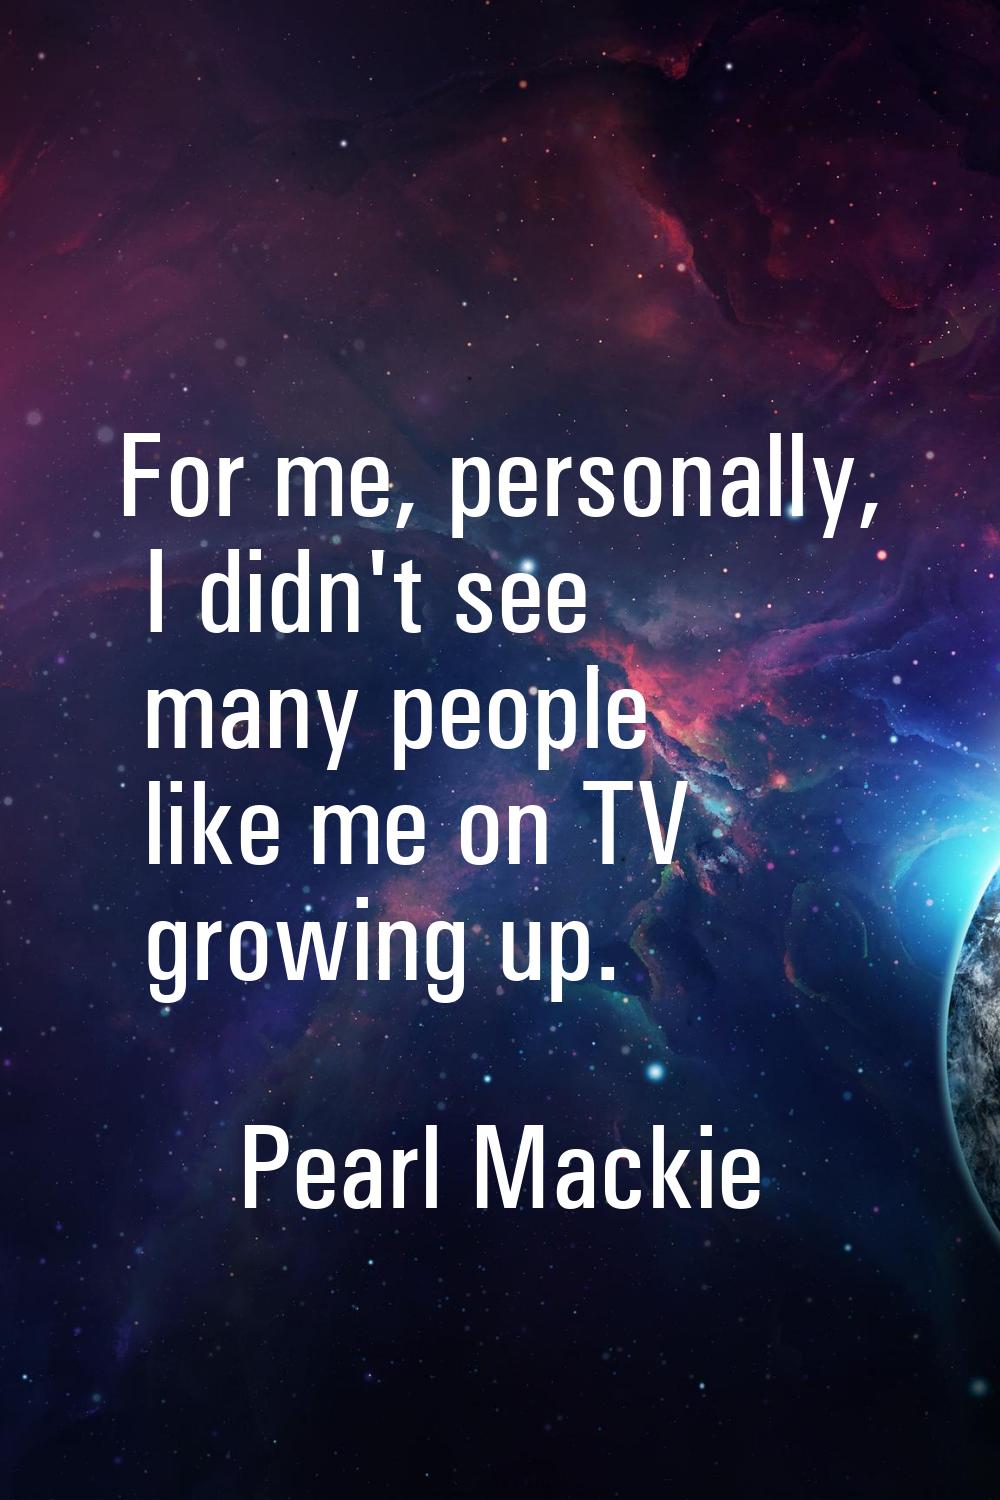 For me, personally, I didn't see many people like me on TV growing up.